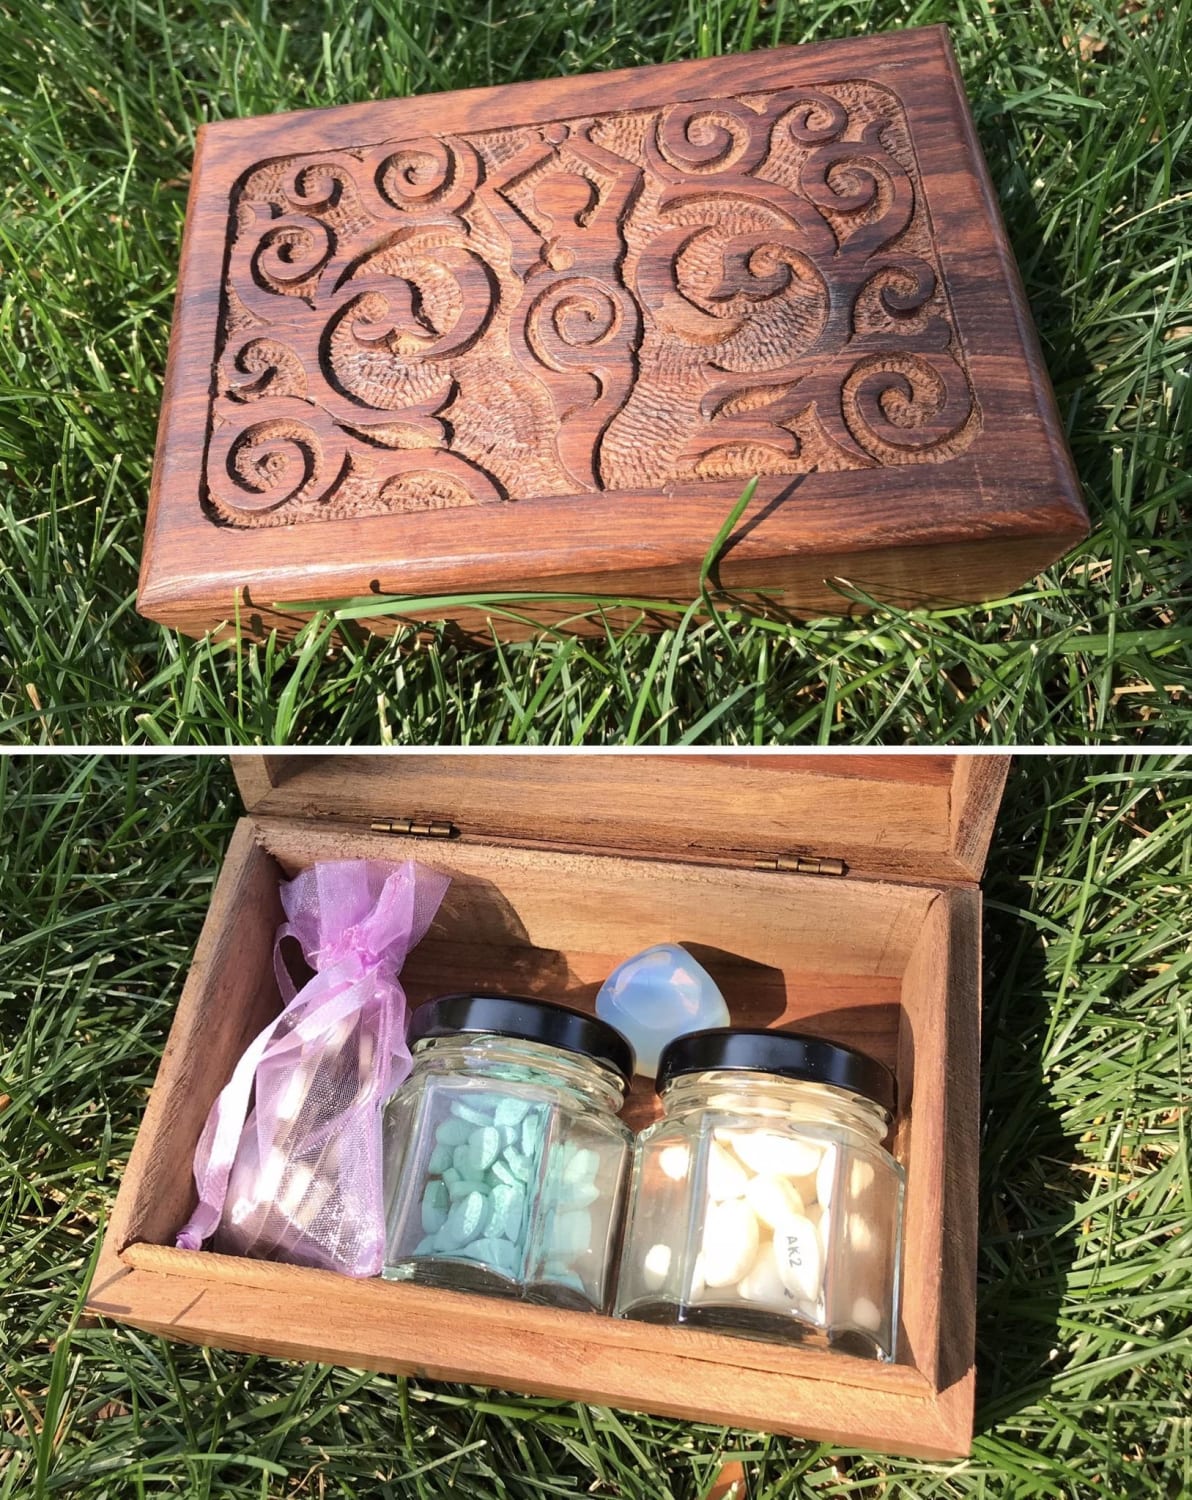 Goddess Box for my trans love’s shape-shifting potions (HRT) ✨❤️ Includes Opalite which is said to support transitions 💎